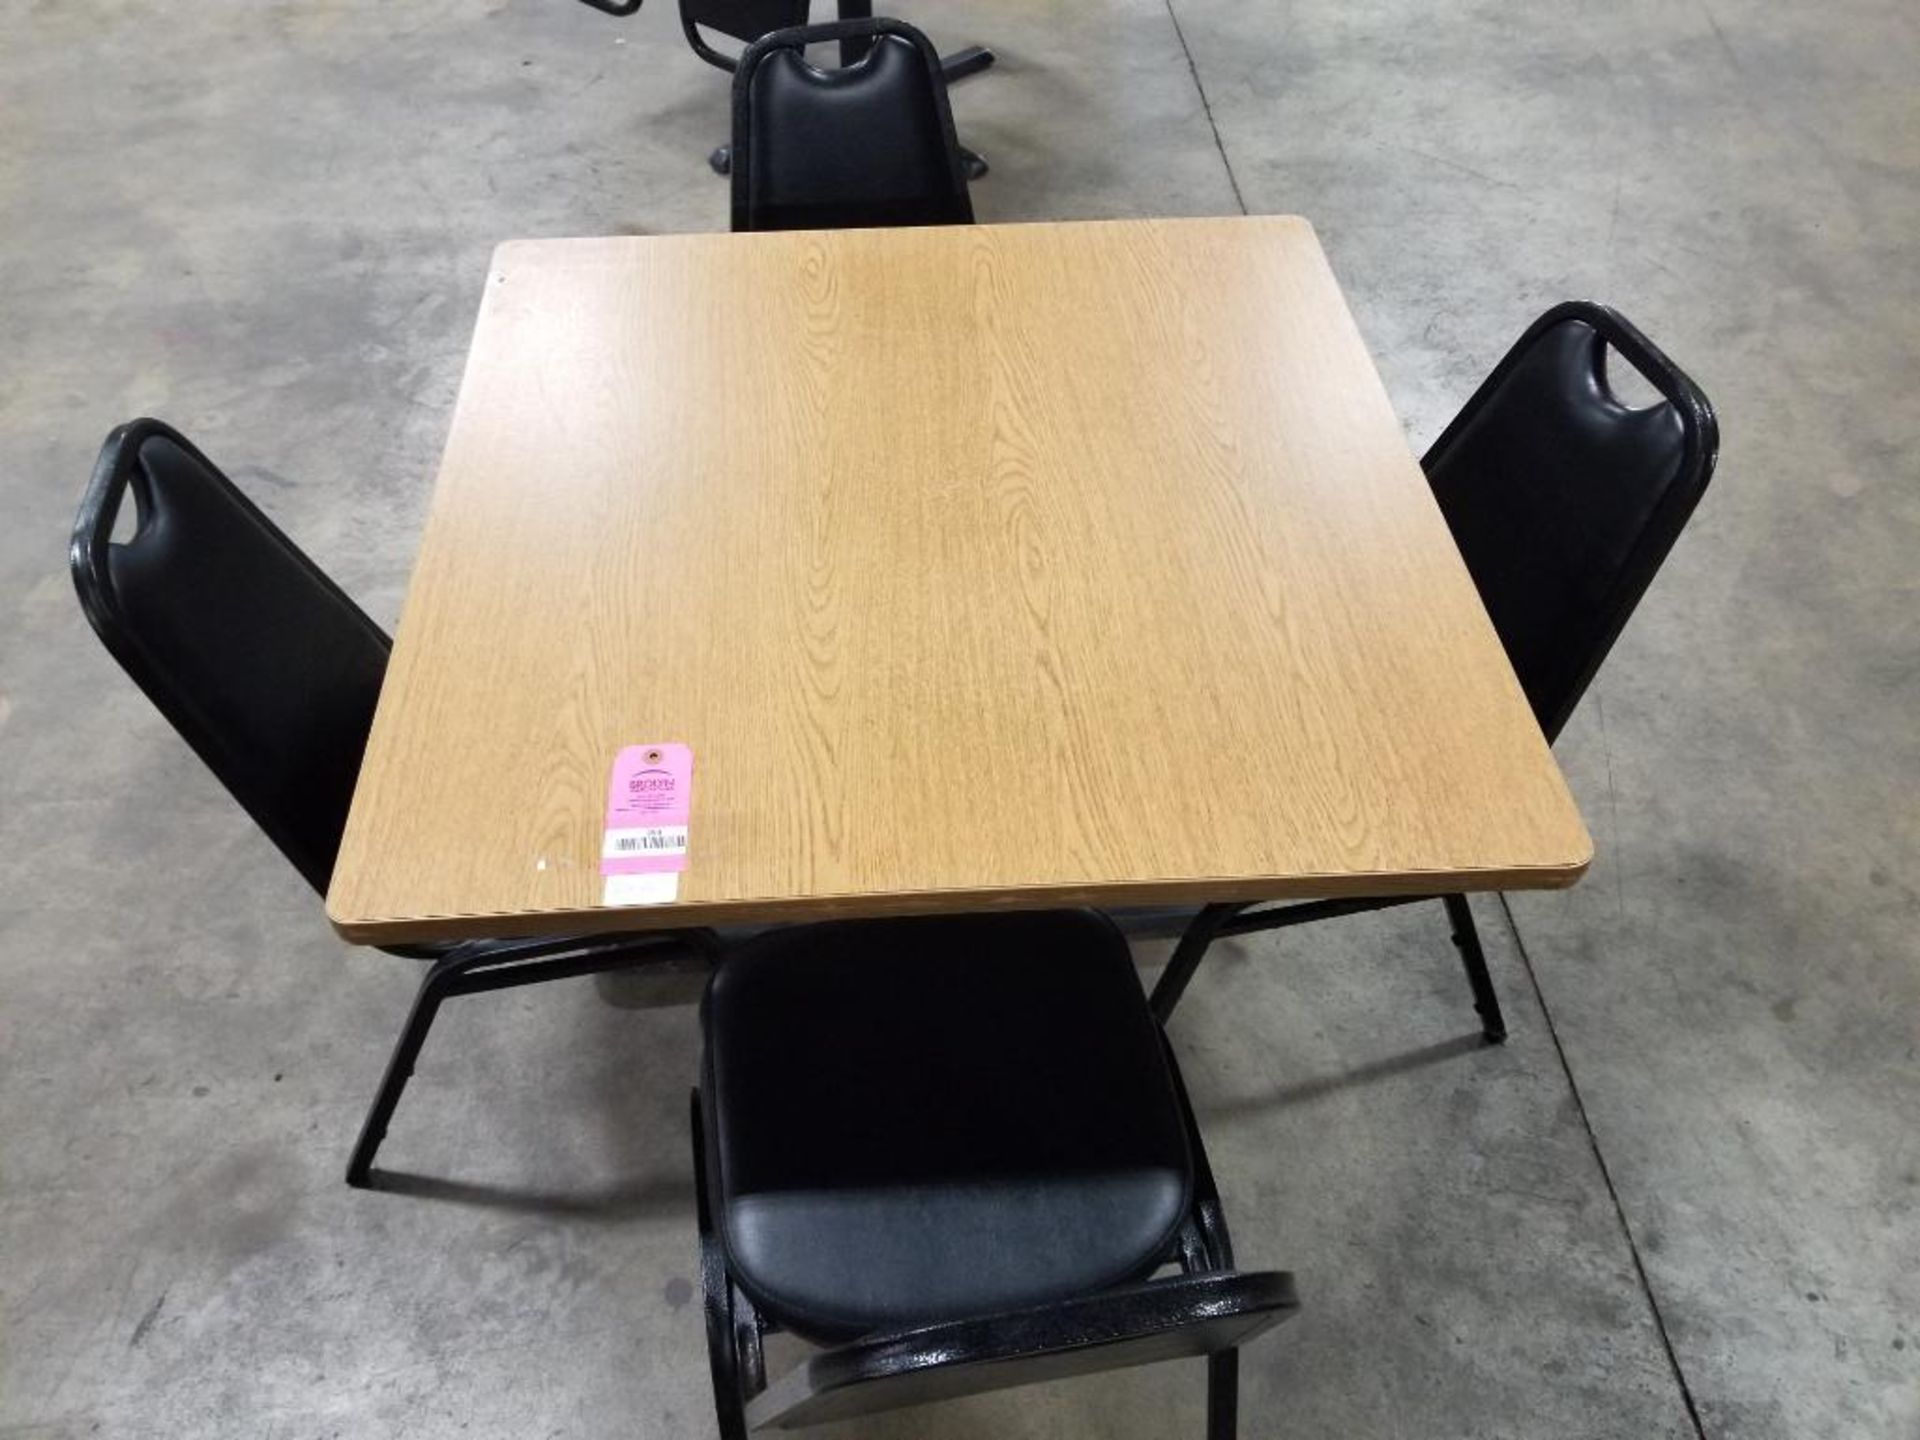 Table with 4 chairs. 36in x 36in table.